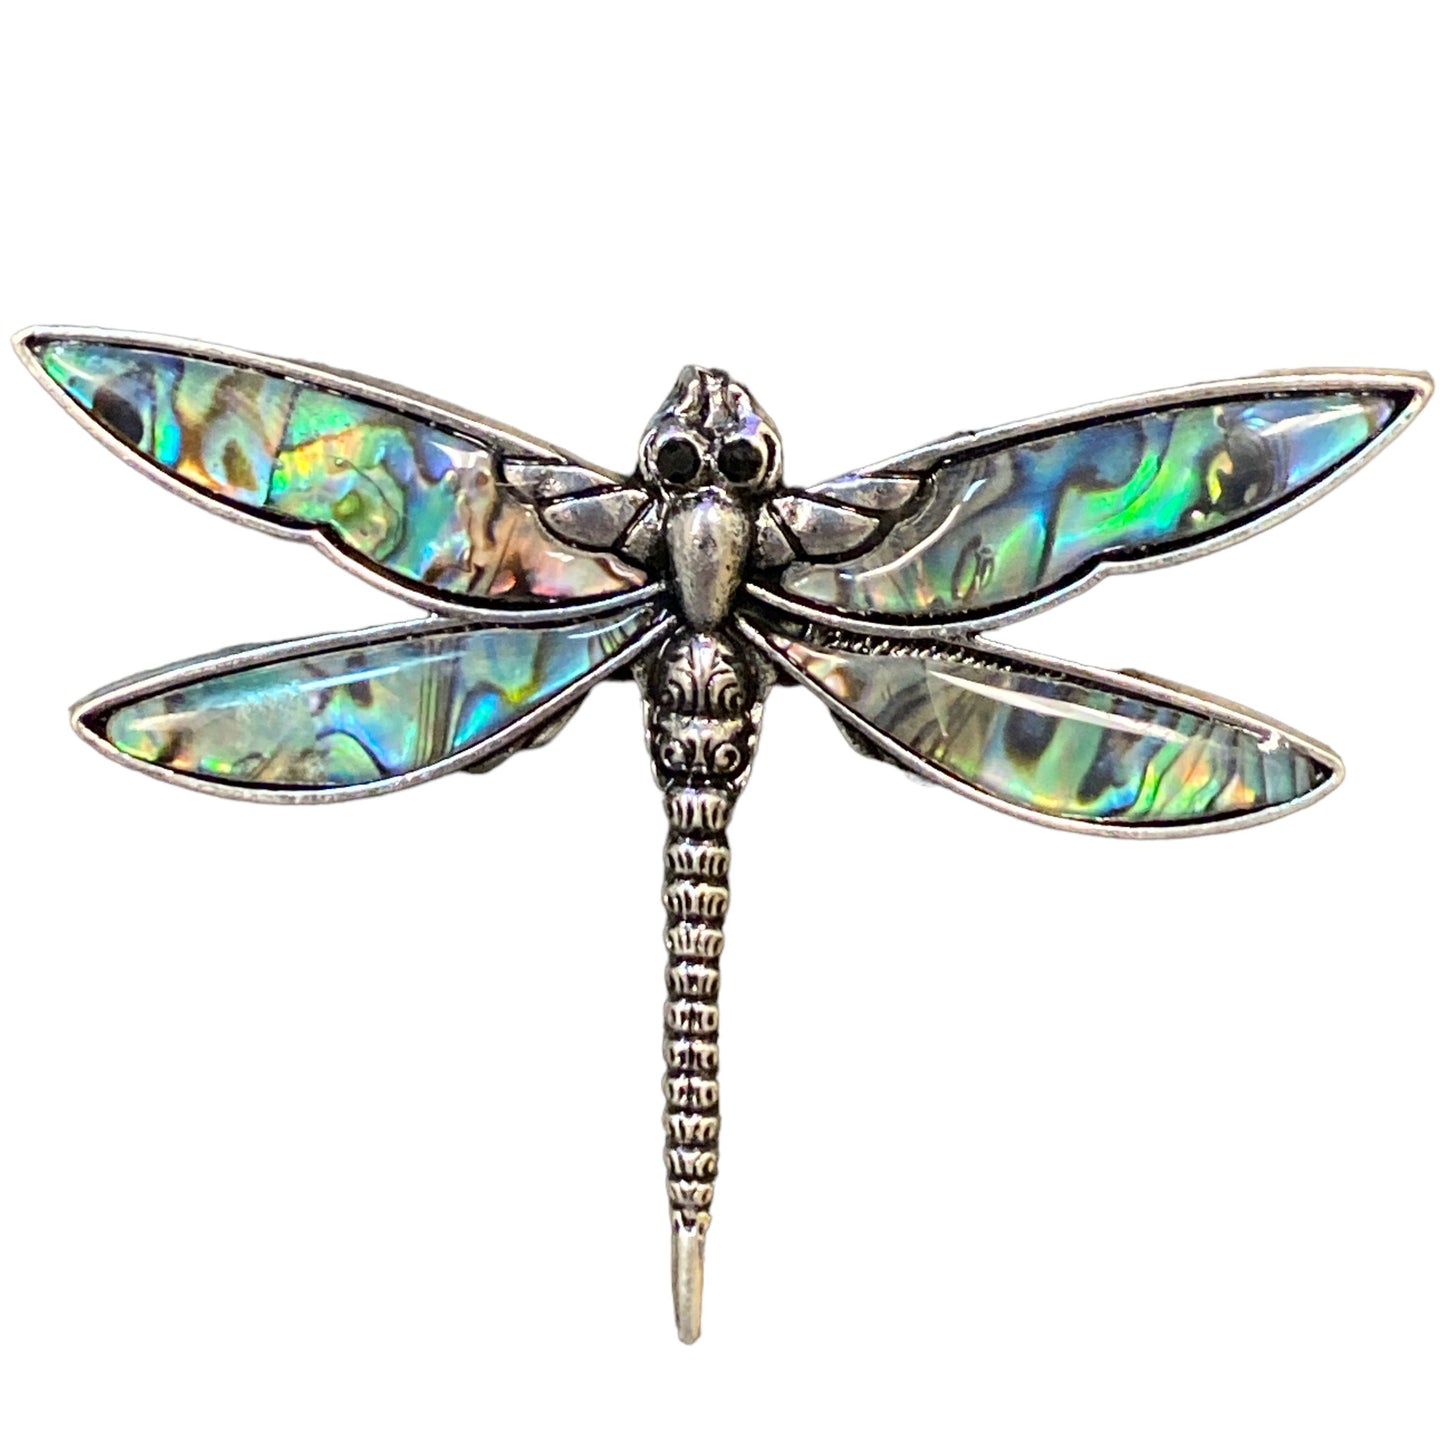 Dragonfly Design Brooch with Abalone Shell inlay - Silver Color Plated Metal - 45mm - China - NEW123